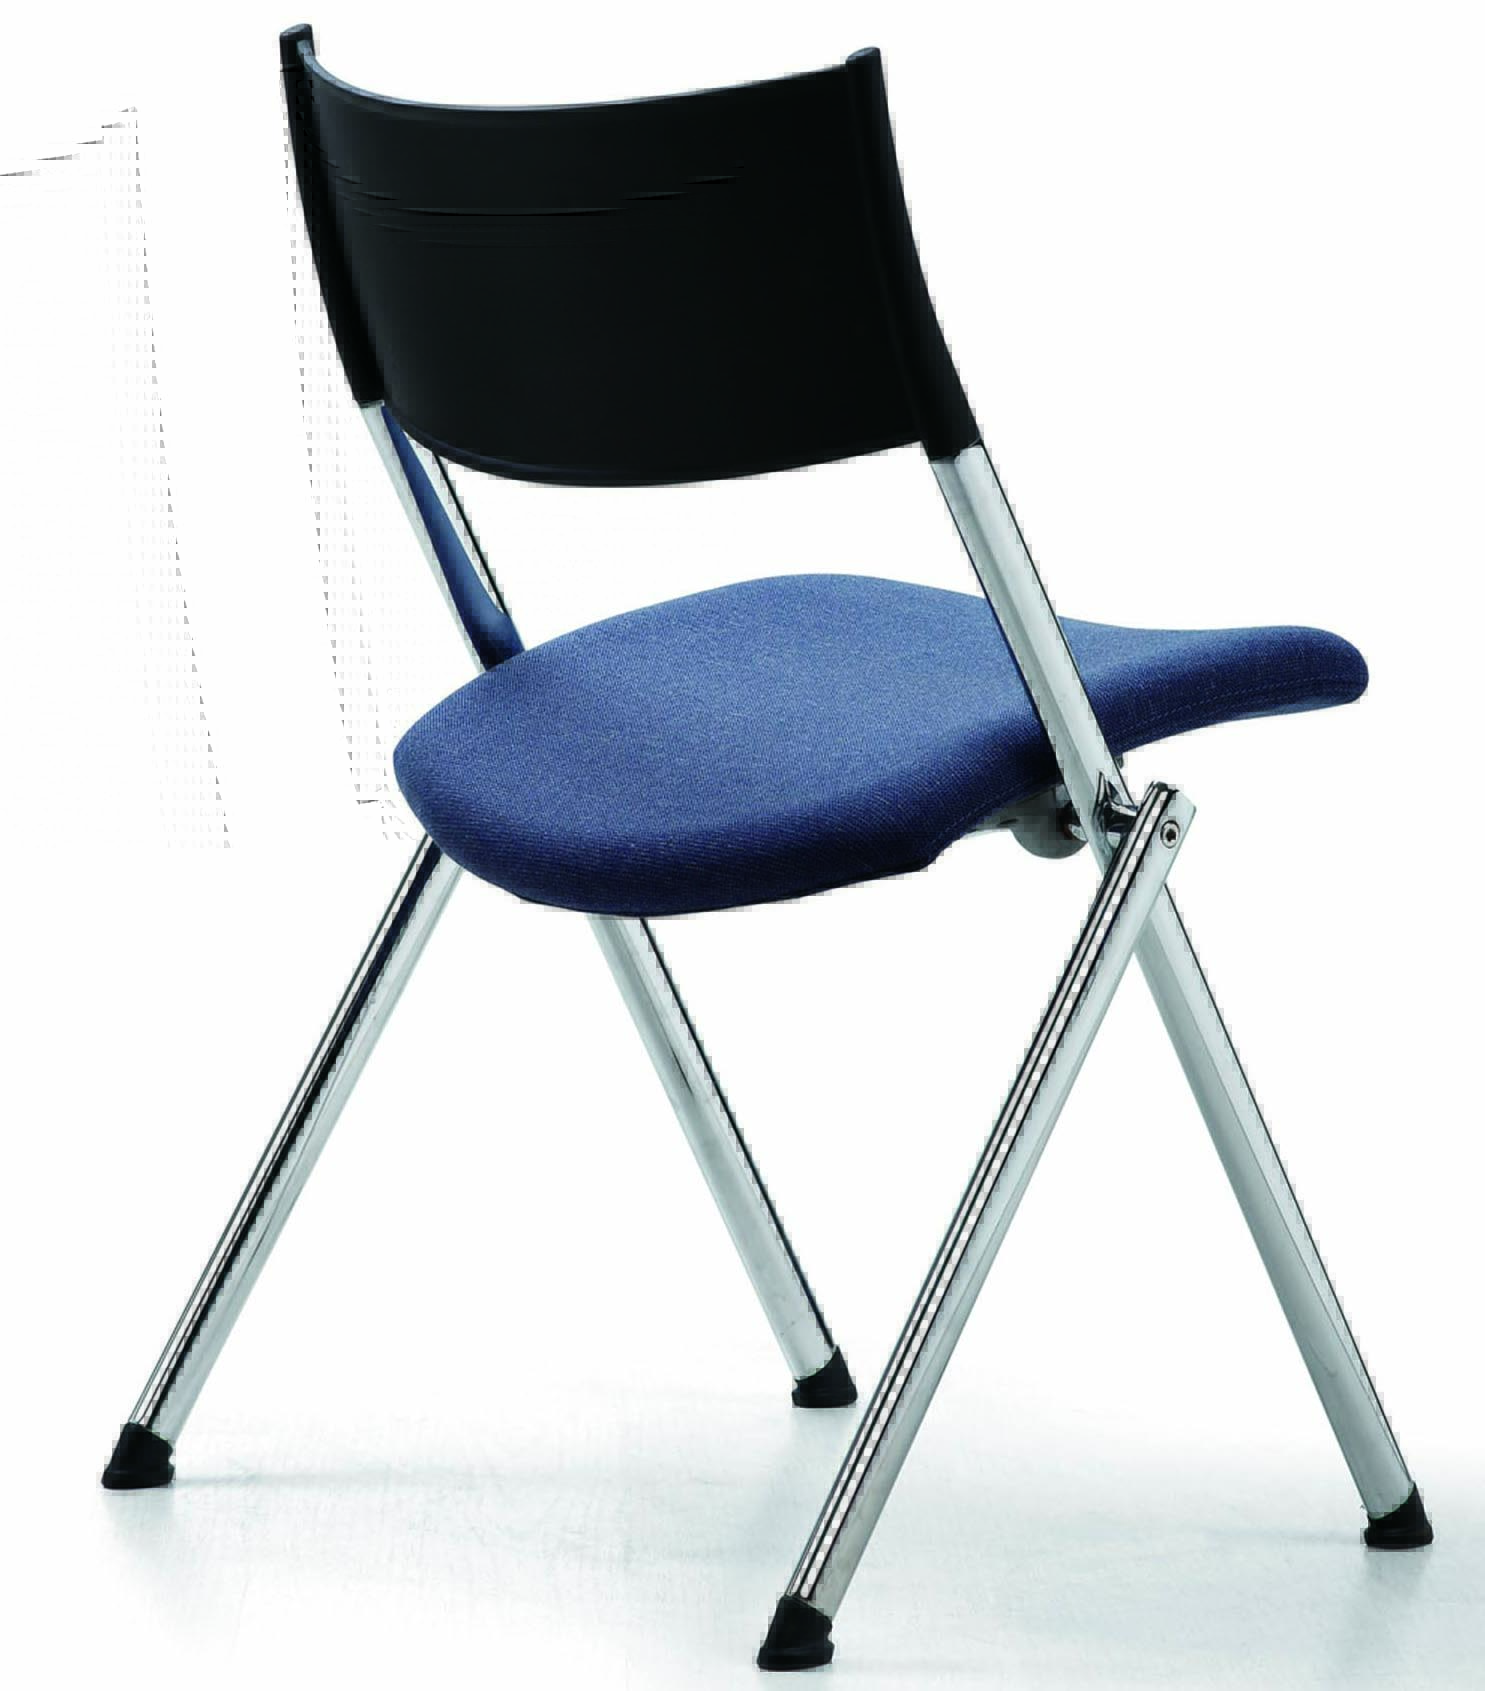 CH-039C1 Multifunctional chair